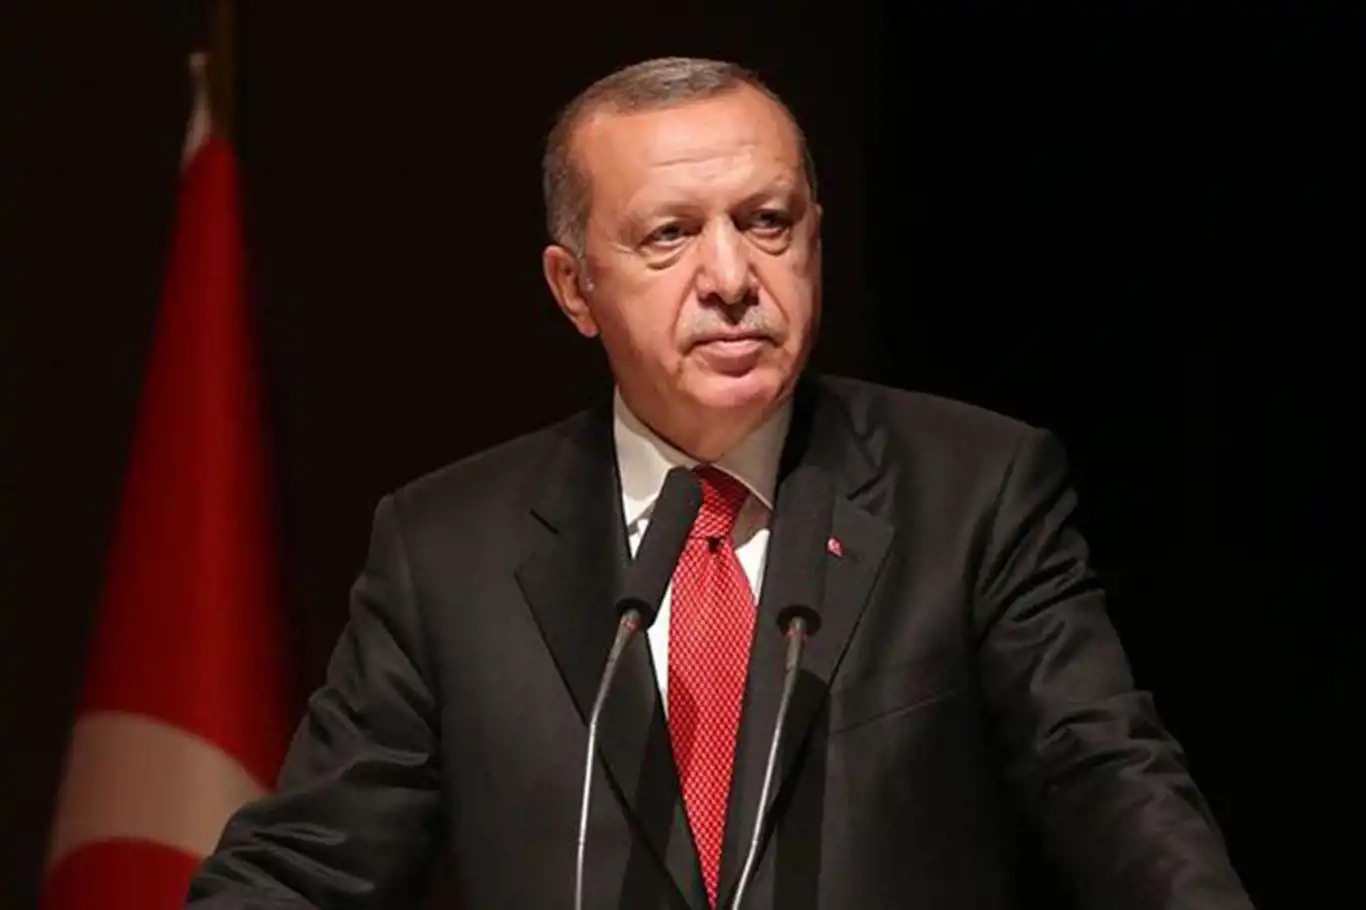 World leaders continue to send congratulatory messages to President Erdoğan